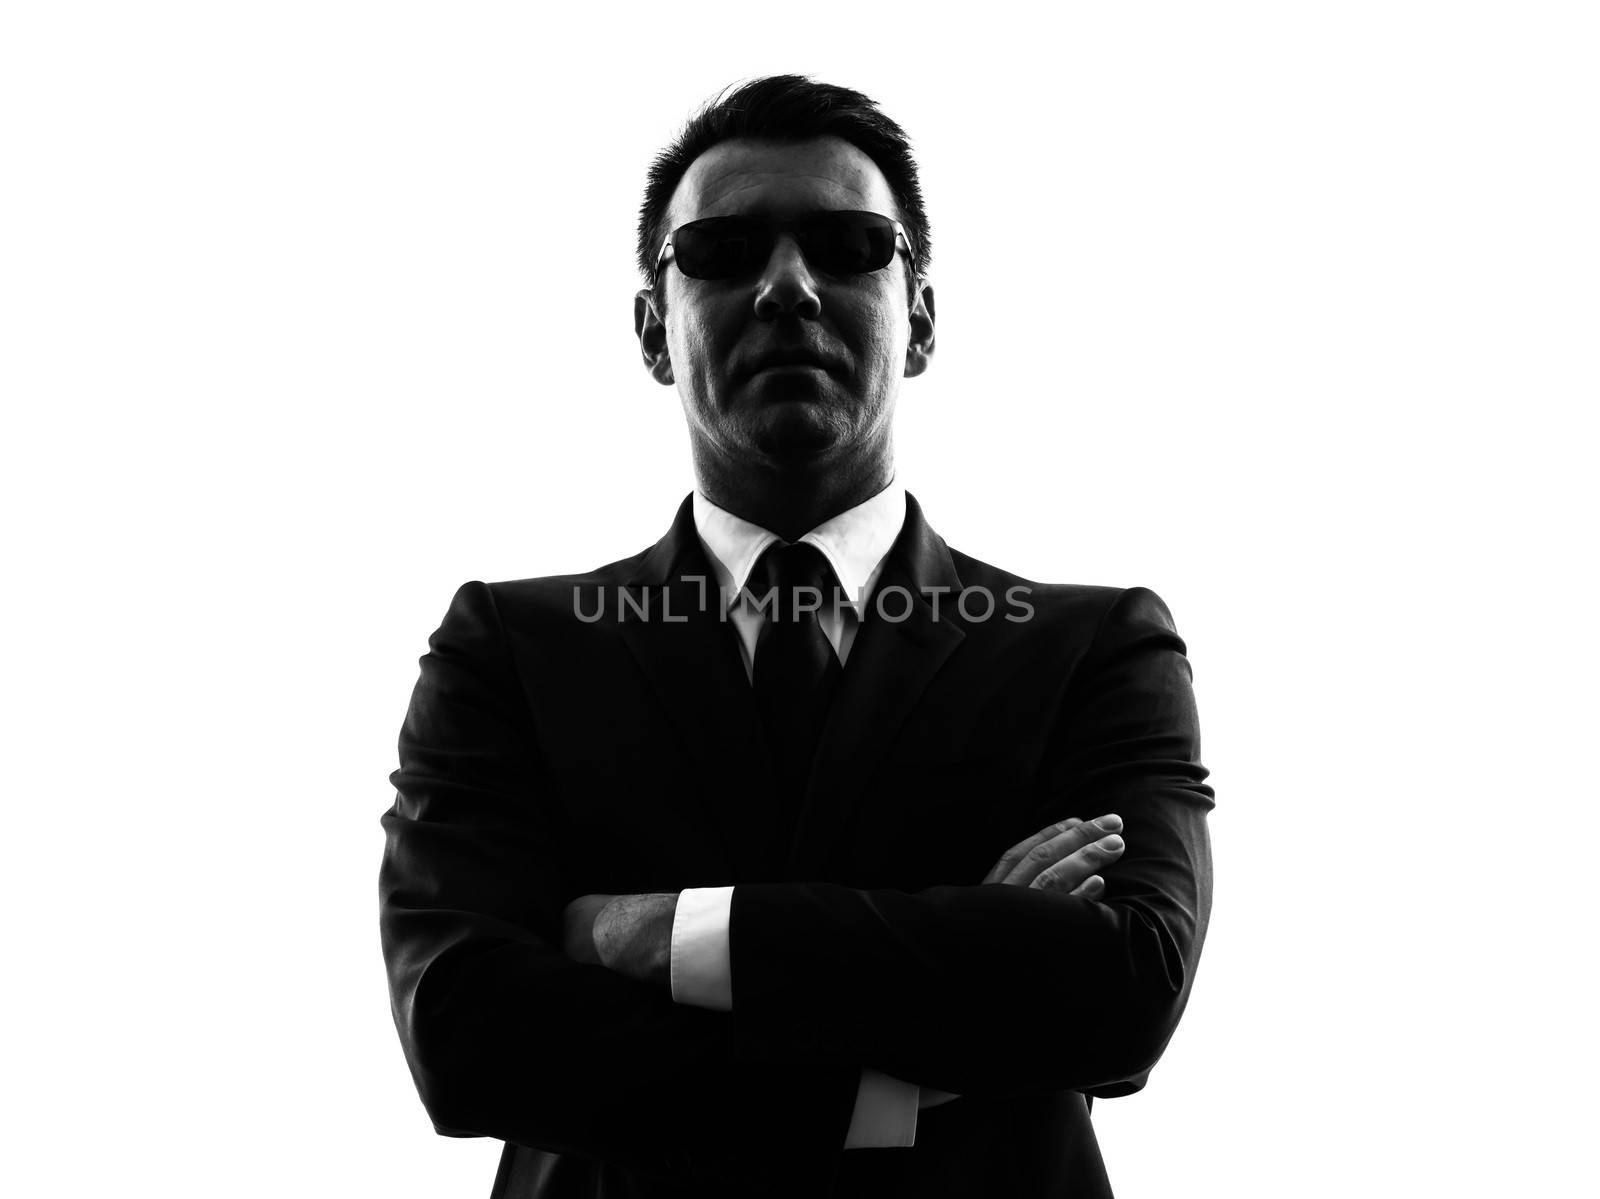 one secret service security bodyguard agent  man in silhouette  on white background